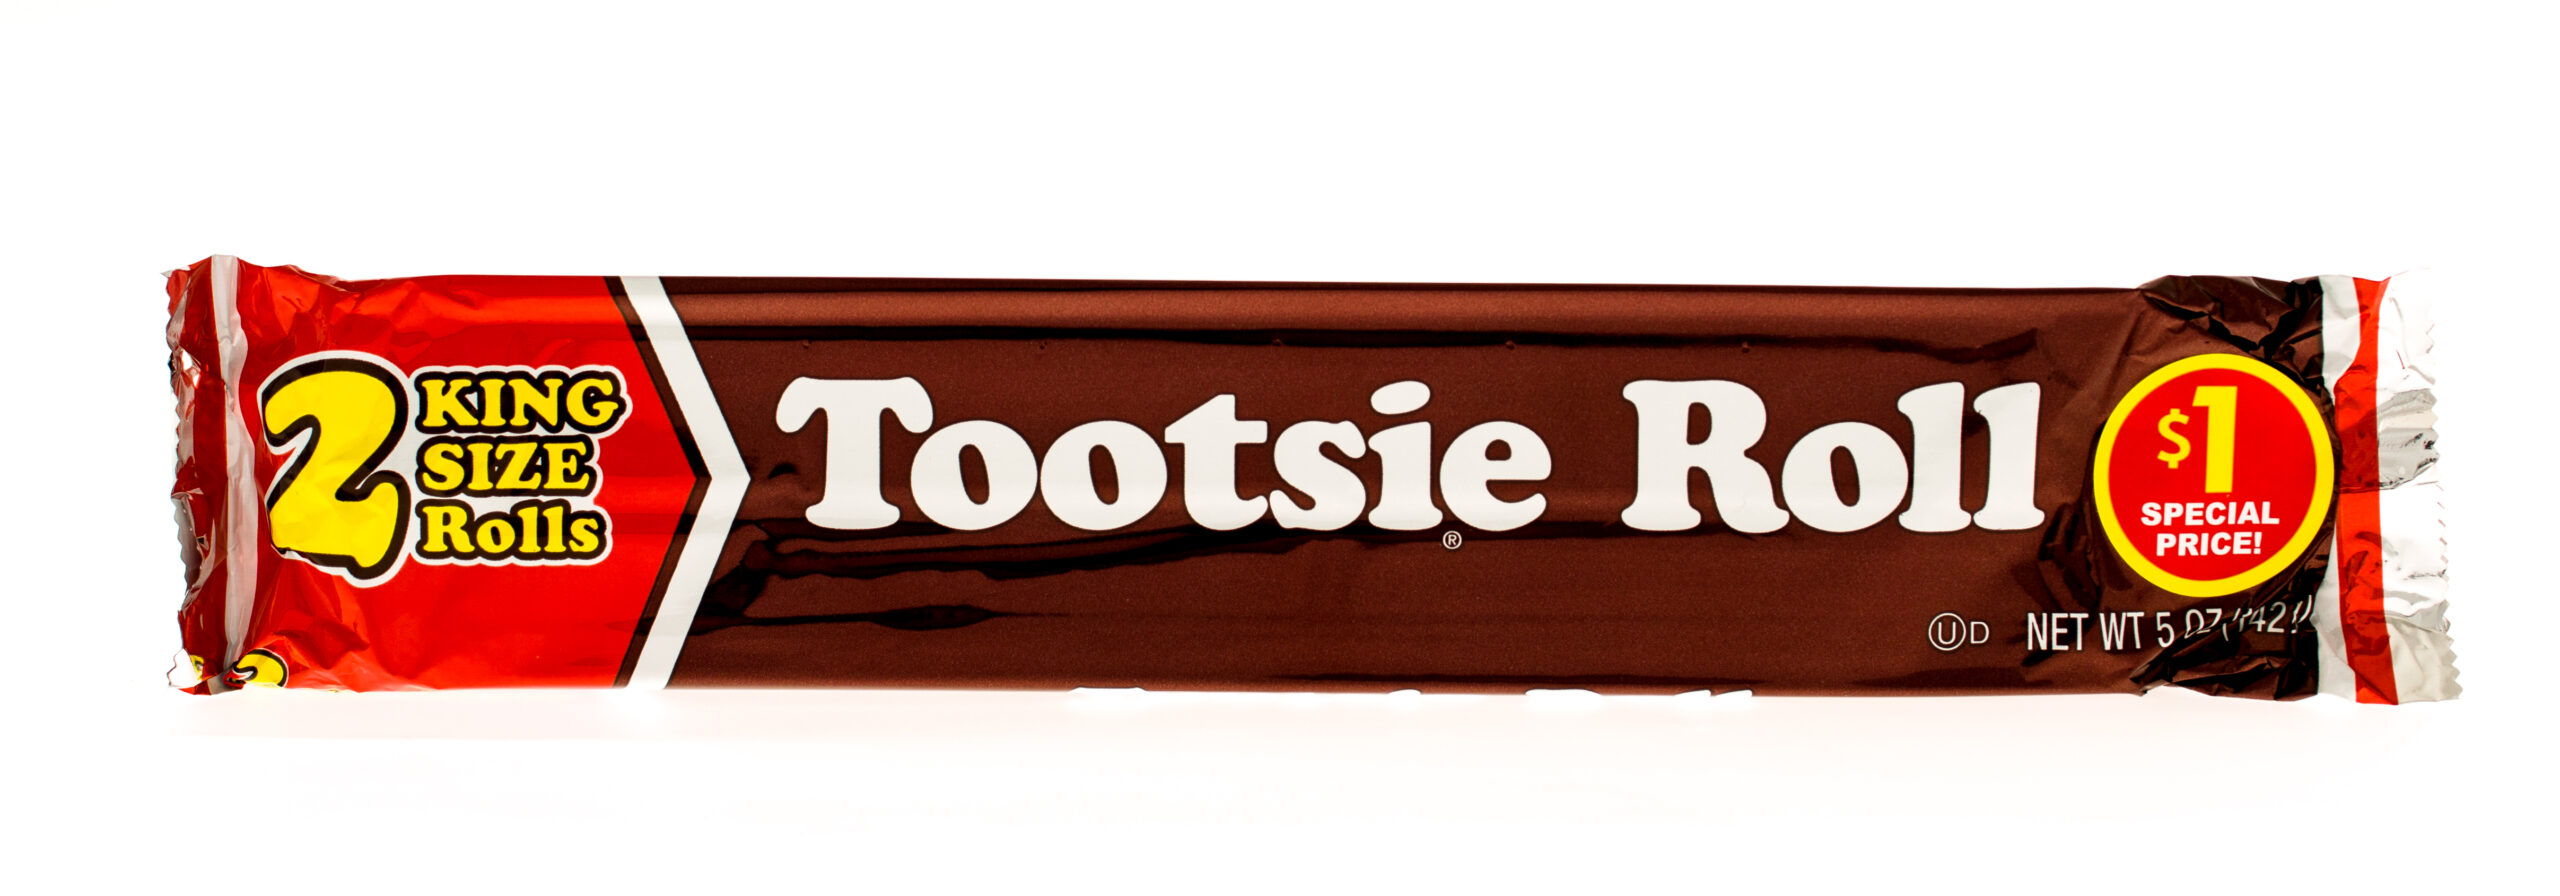 who was the tootsie roll named after